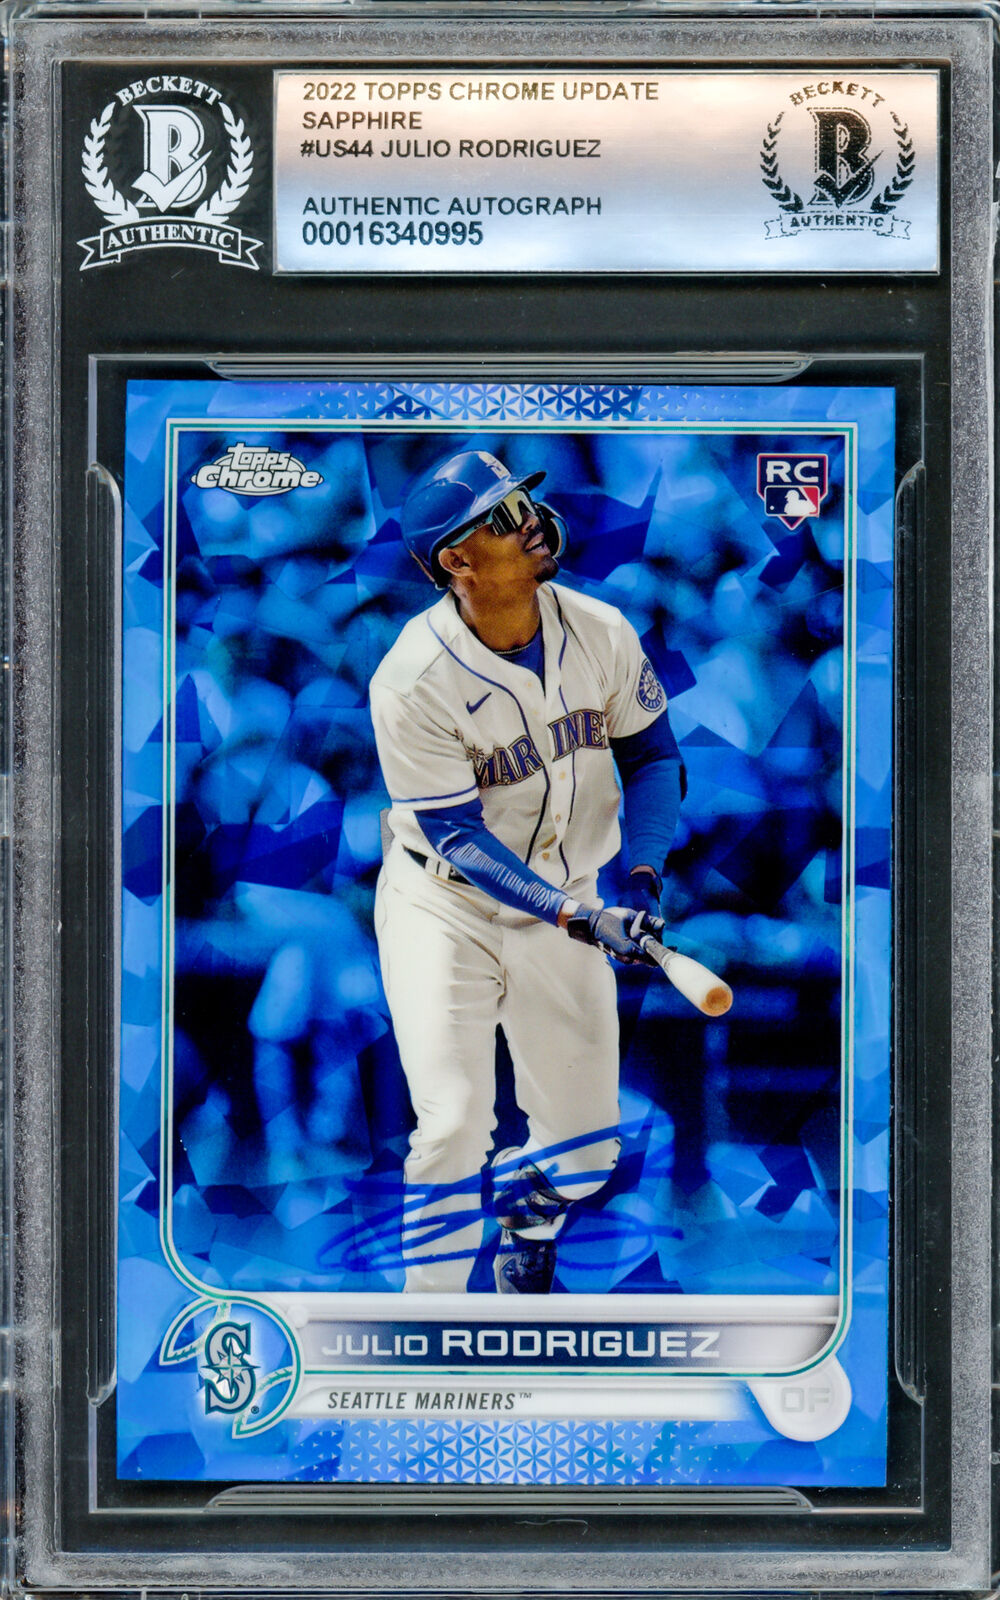 Julio Rodriguez Autographed 2022 Topps Chrome Update Sapphire RC Beckett Image 1